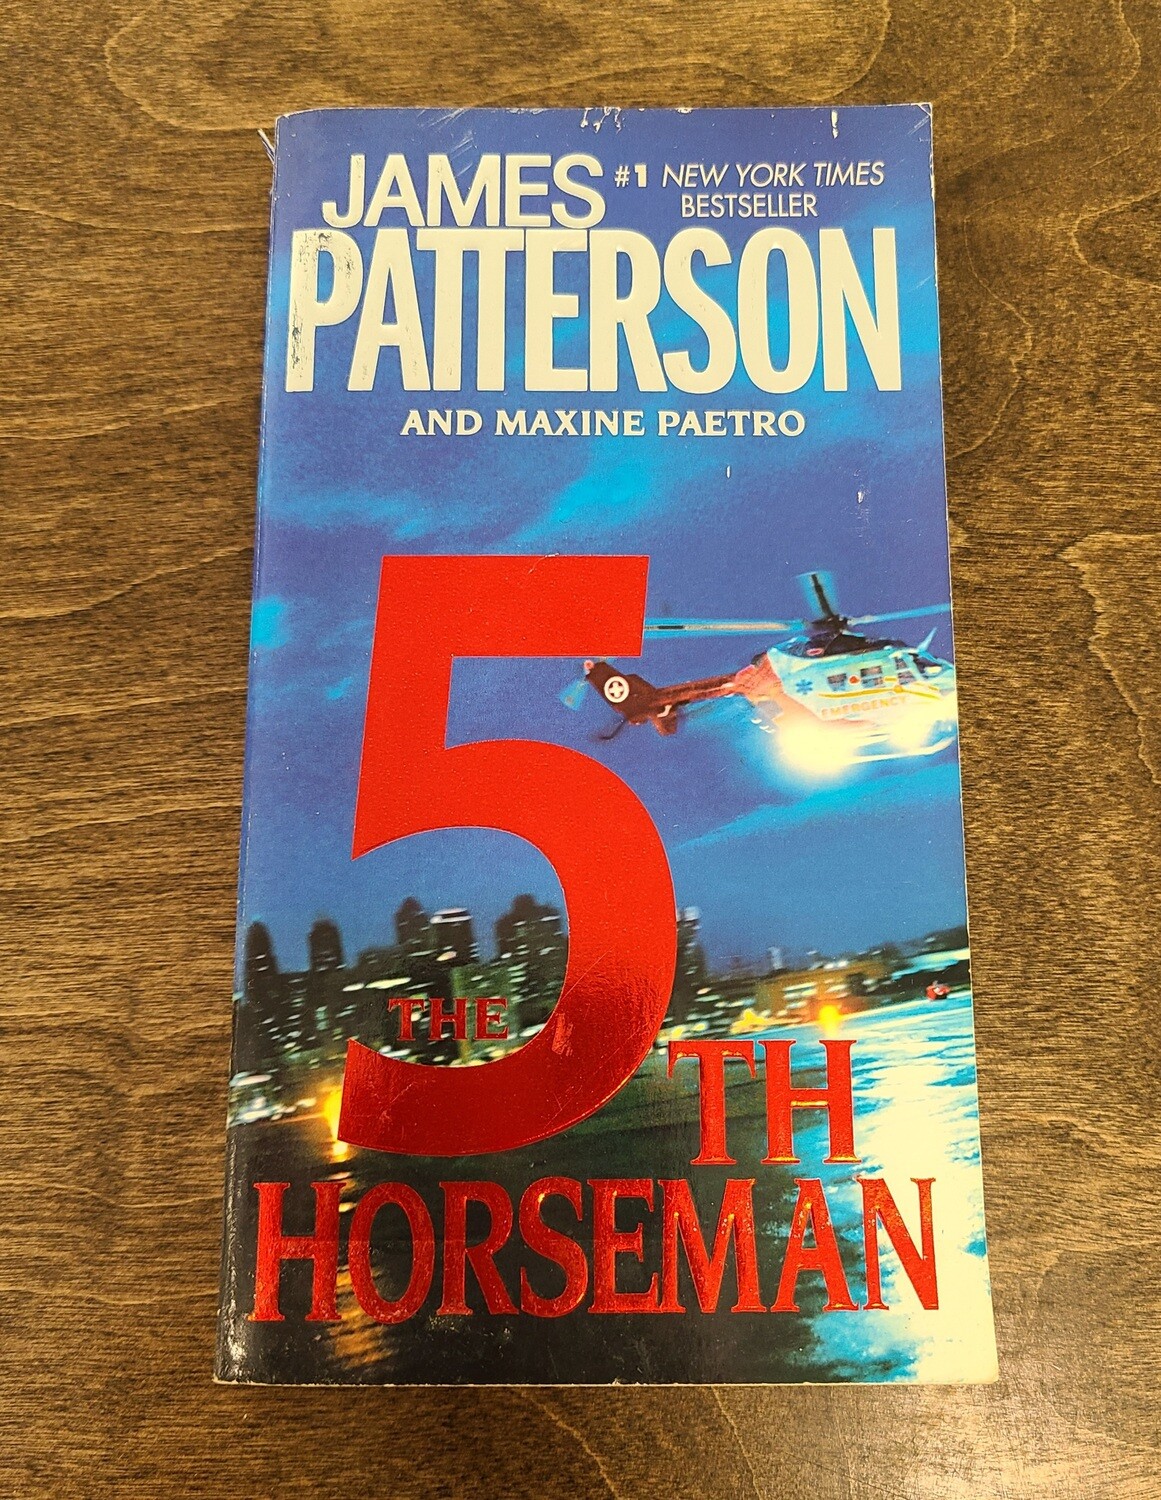 The 5th Horseman by James Patterson and Maxine Paetro - Paperback